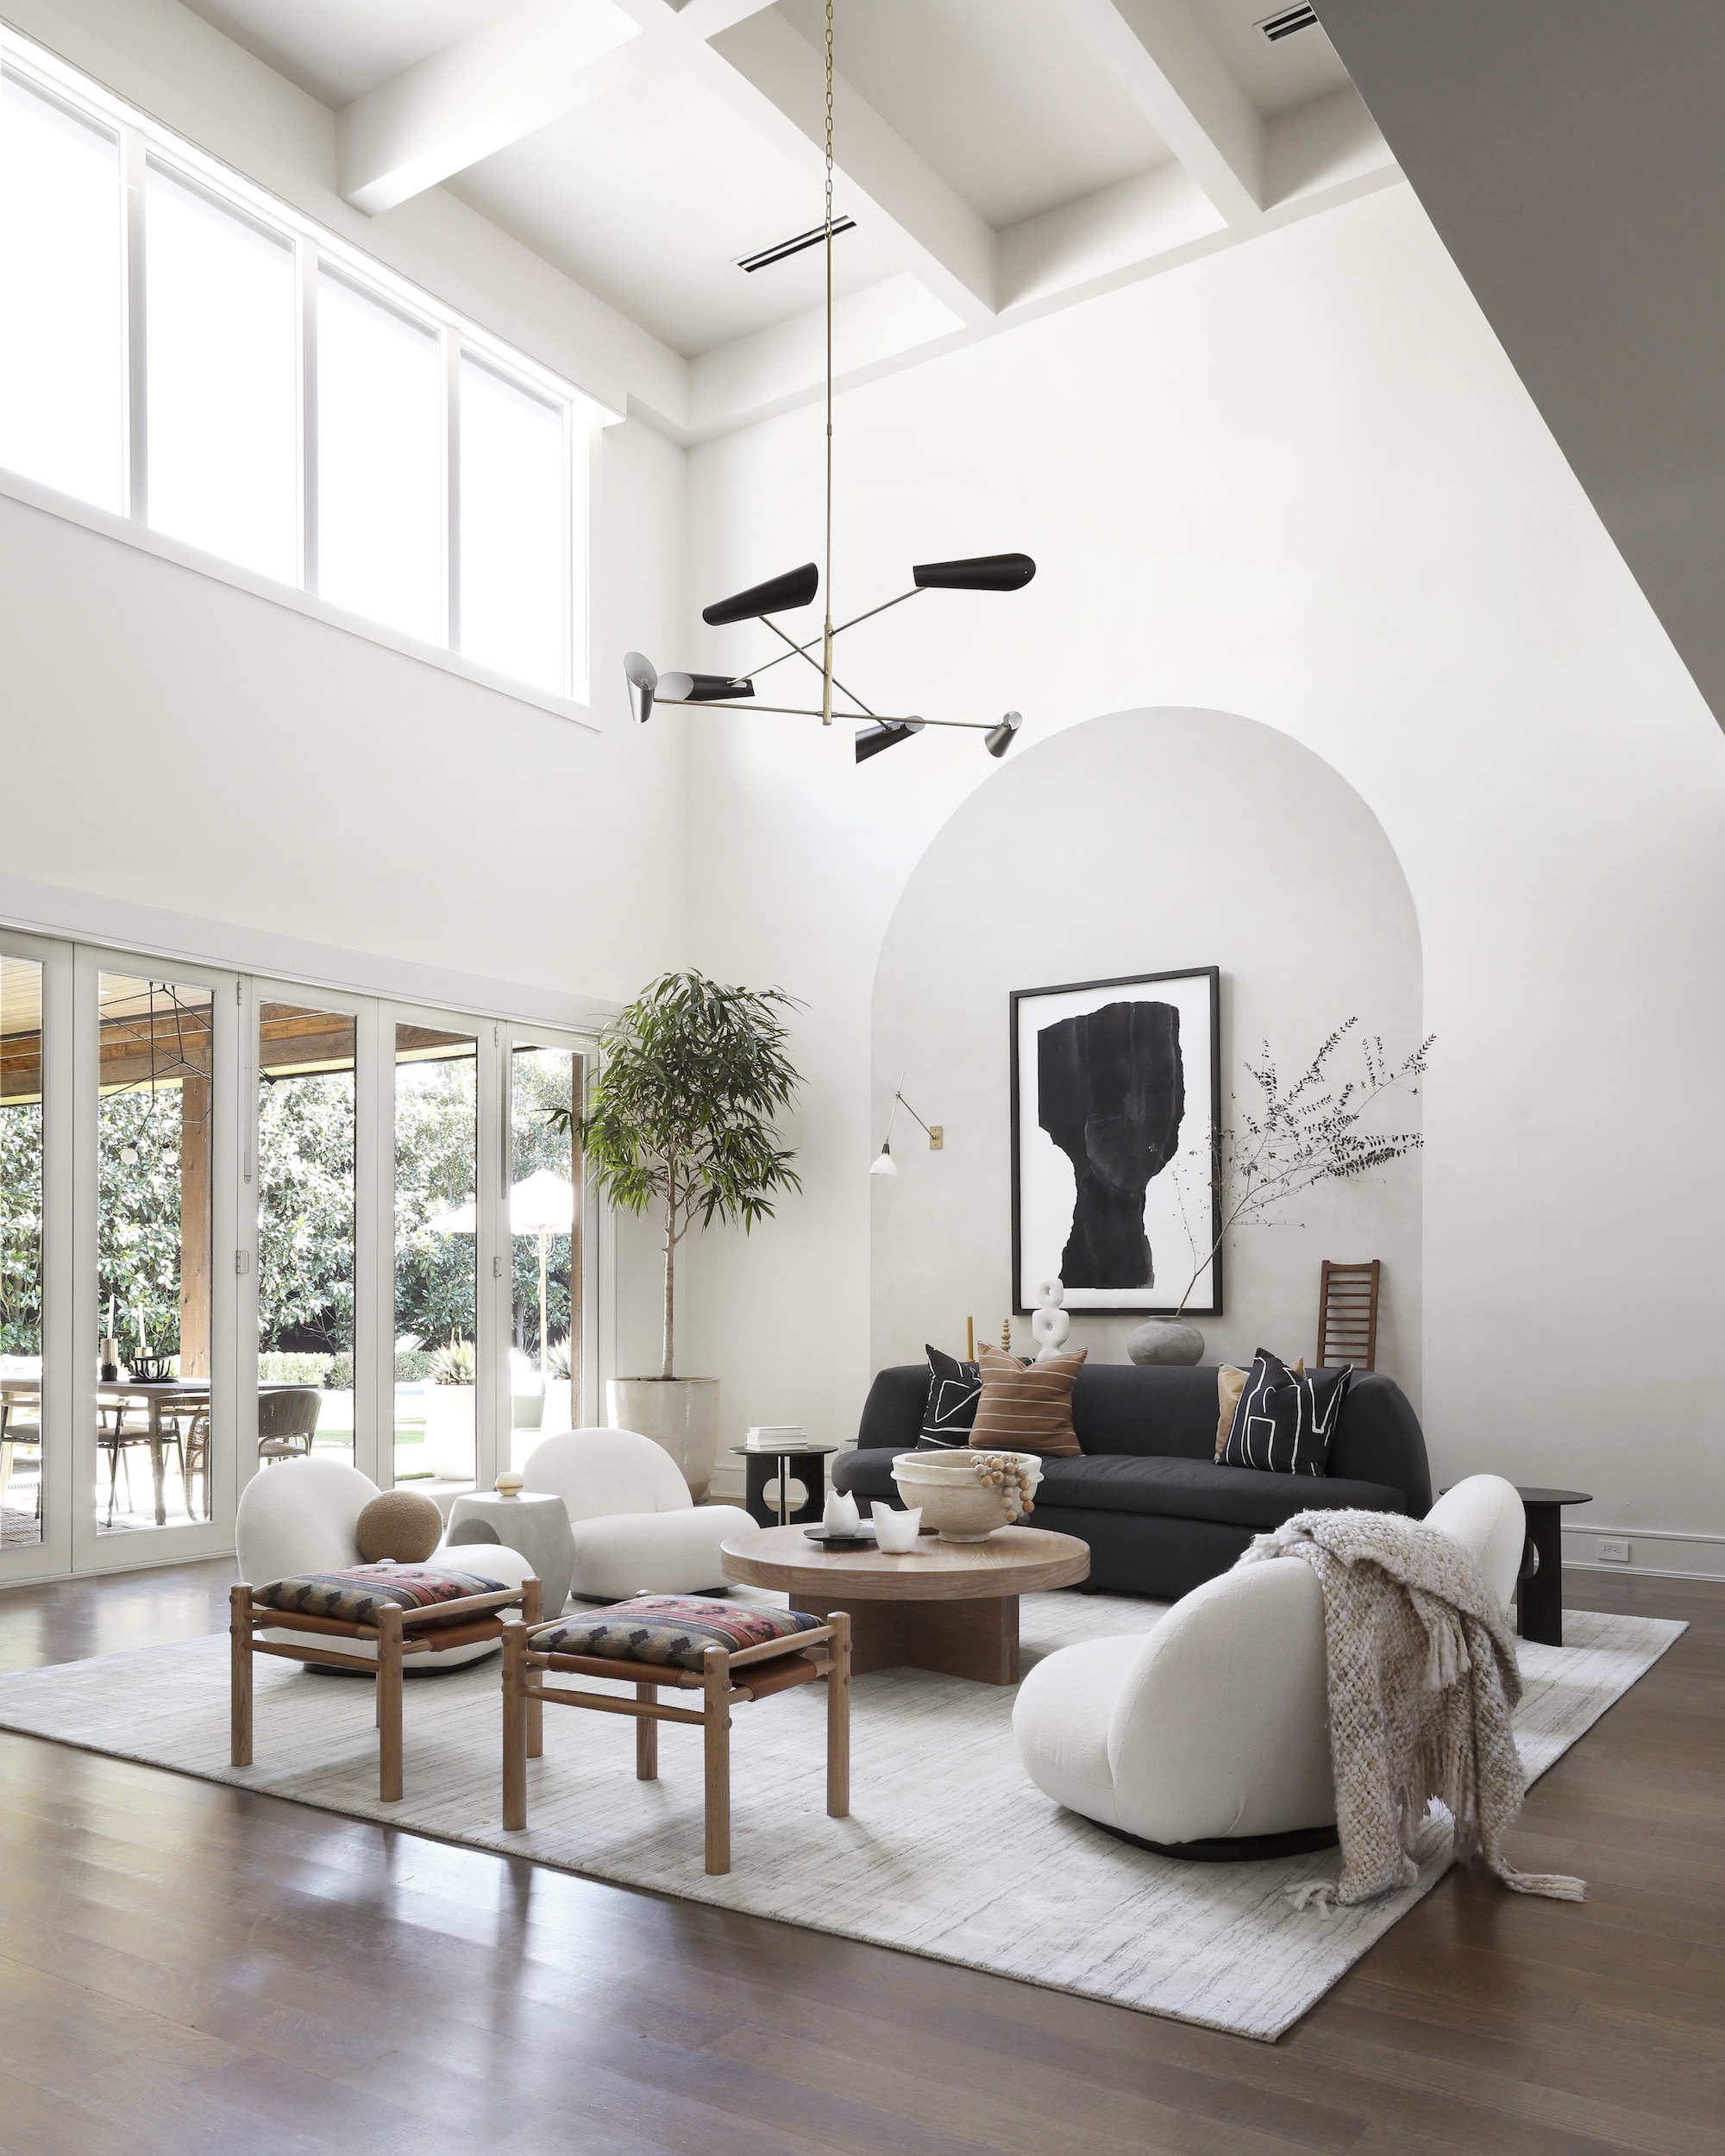 10 Best Ceiling Designs for Living Rooms - Latest Family Room Ceiling Ideas